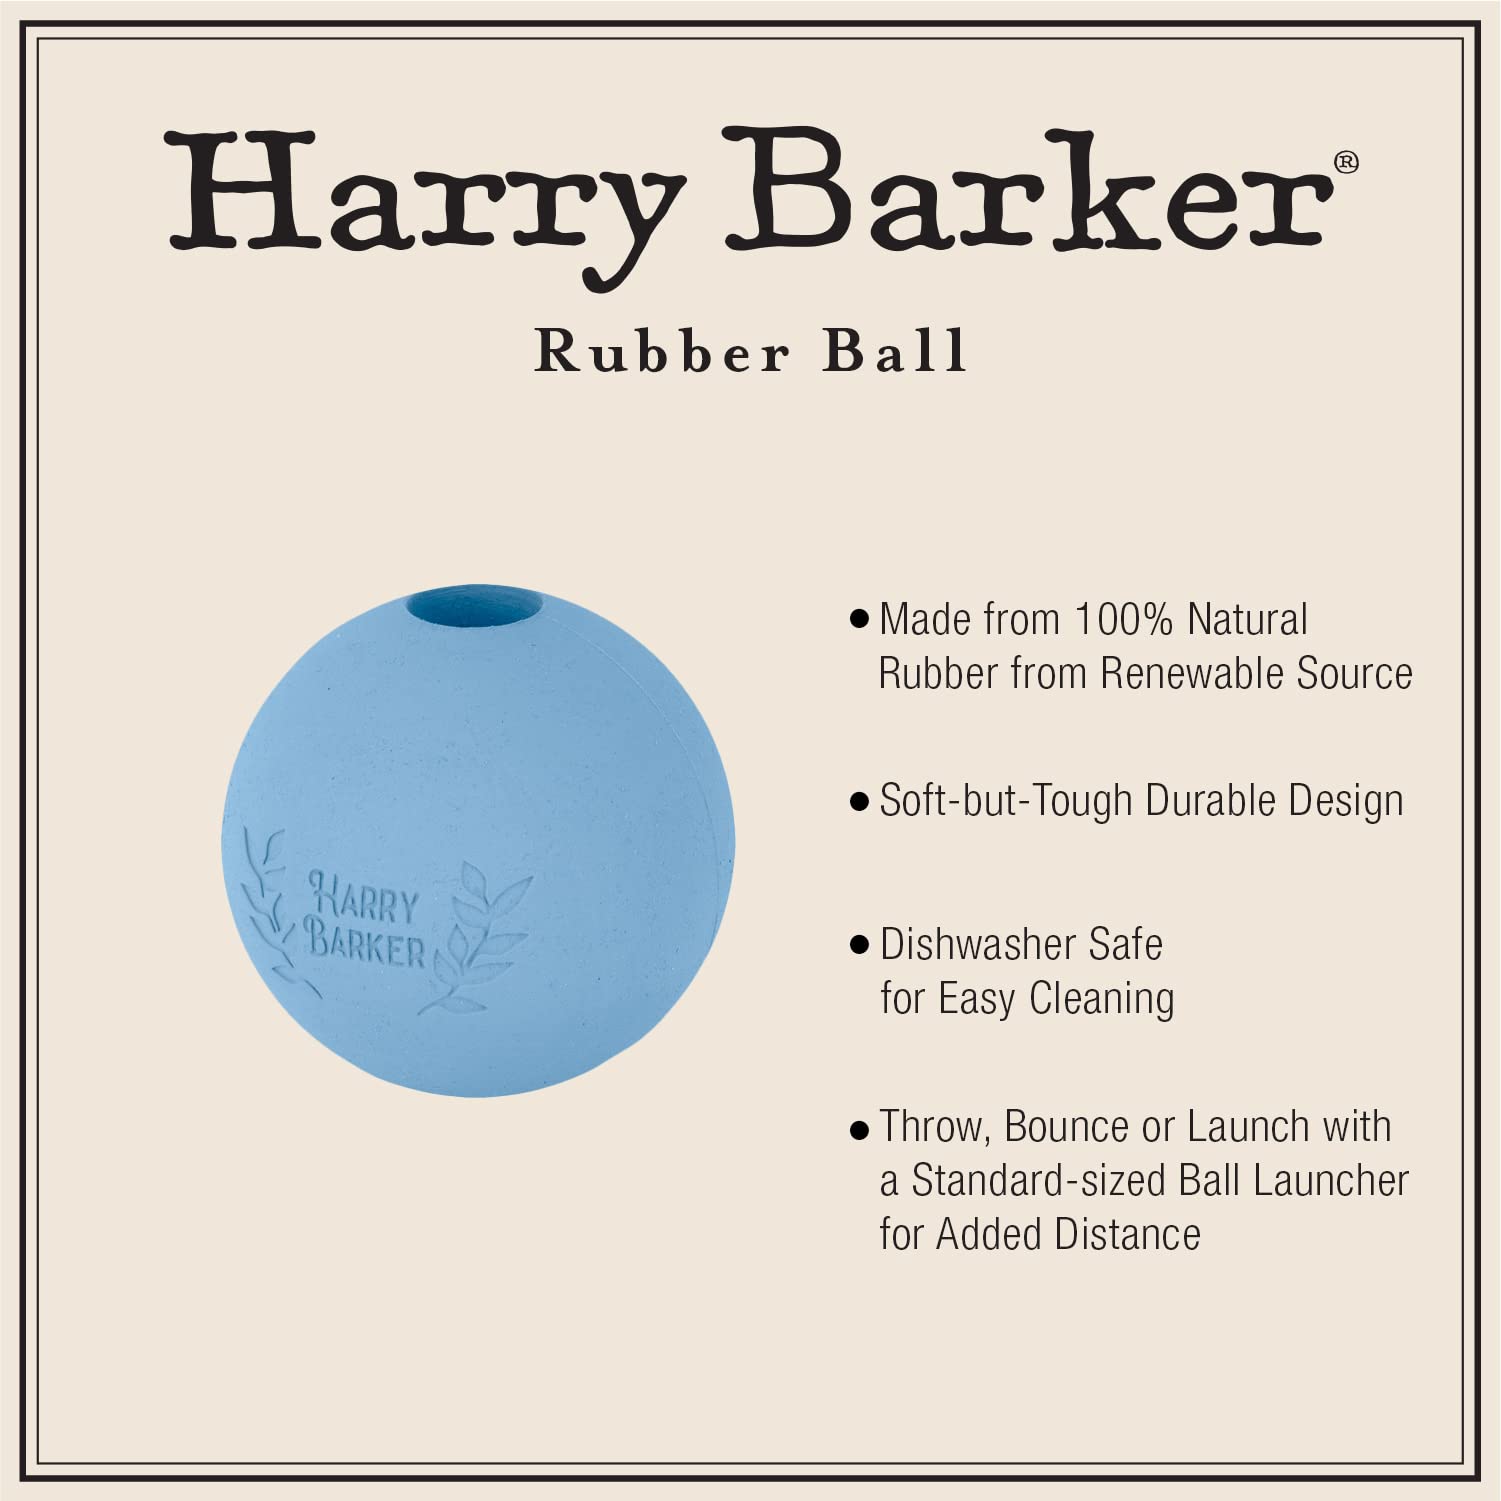 Harry Barker Rubber Balls and Rubber Chew Stick, Rubber Bone for Dogs - 2.5